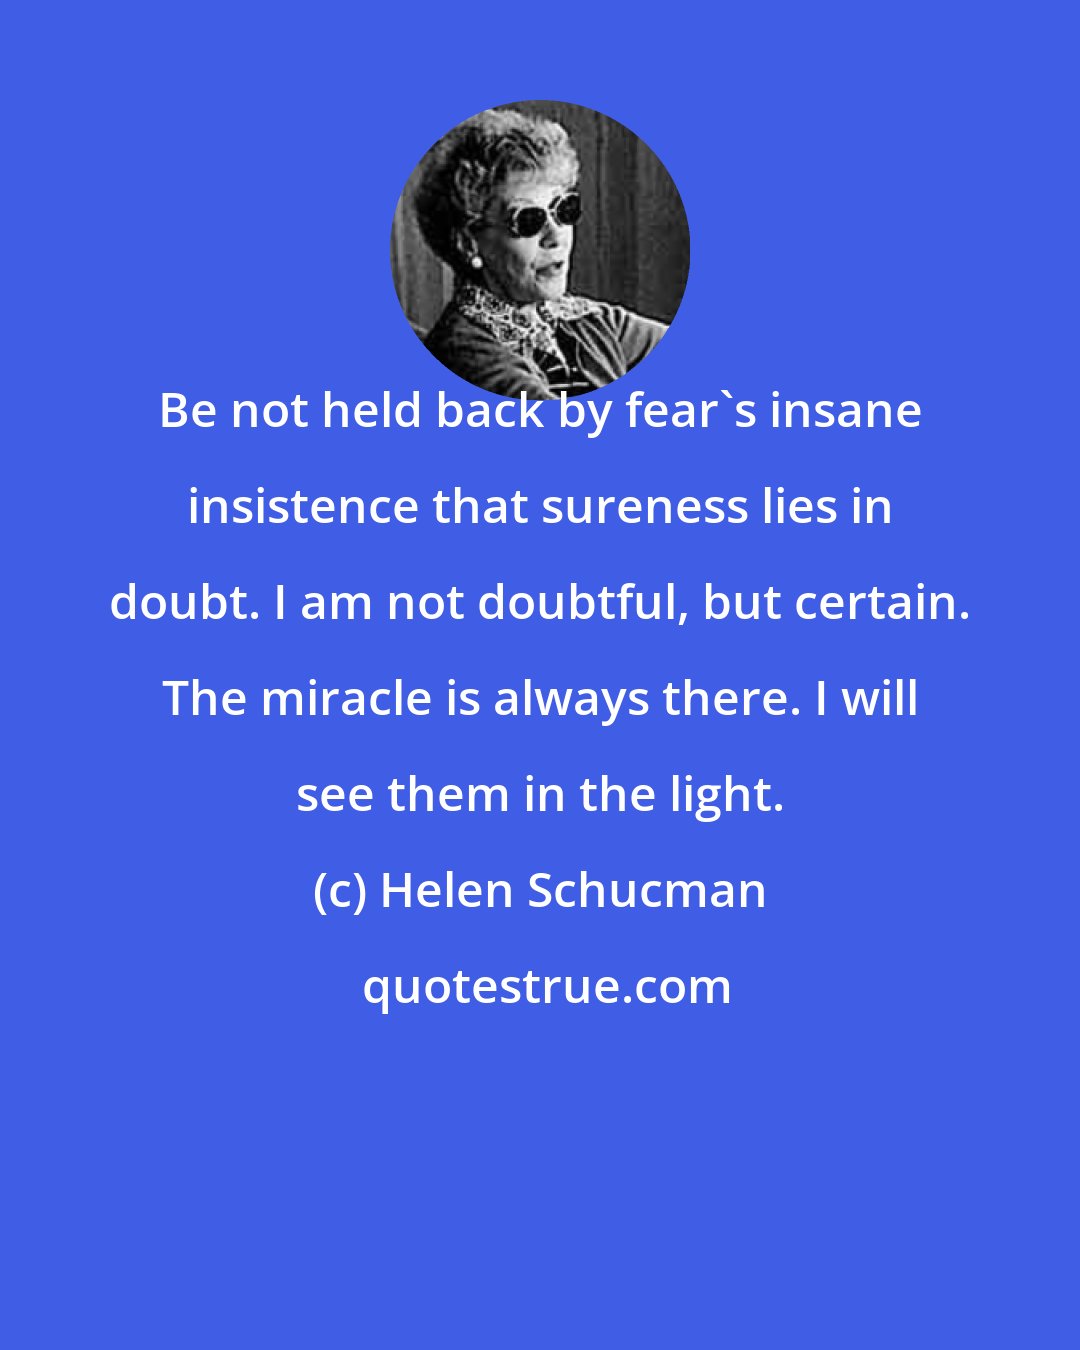 Helen Schucman: Be not held back by fear's insane insistence that sureness lies in doubt. I am not doubtful, but certain. The miracle is always there. I will see them in the light.